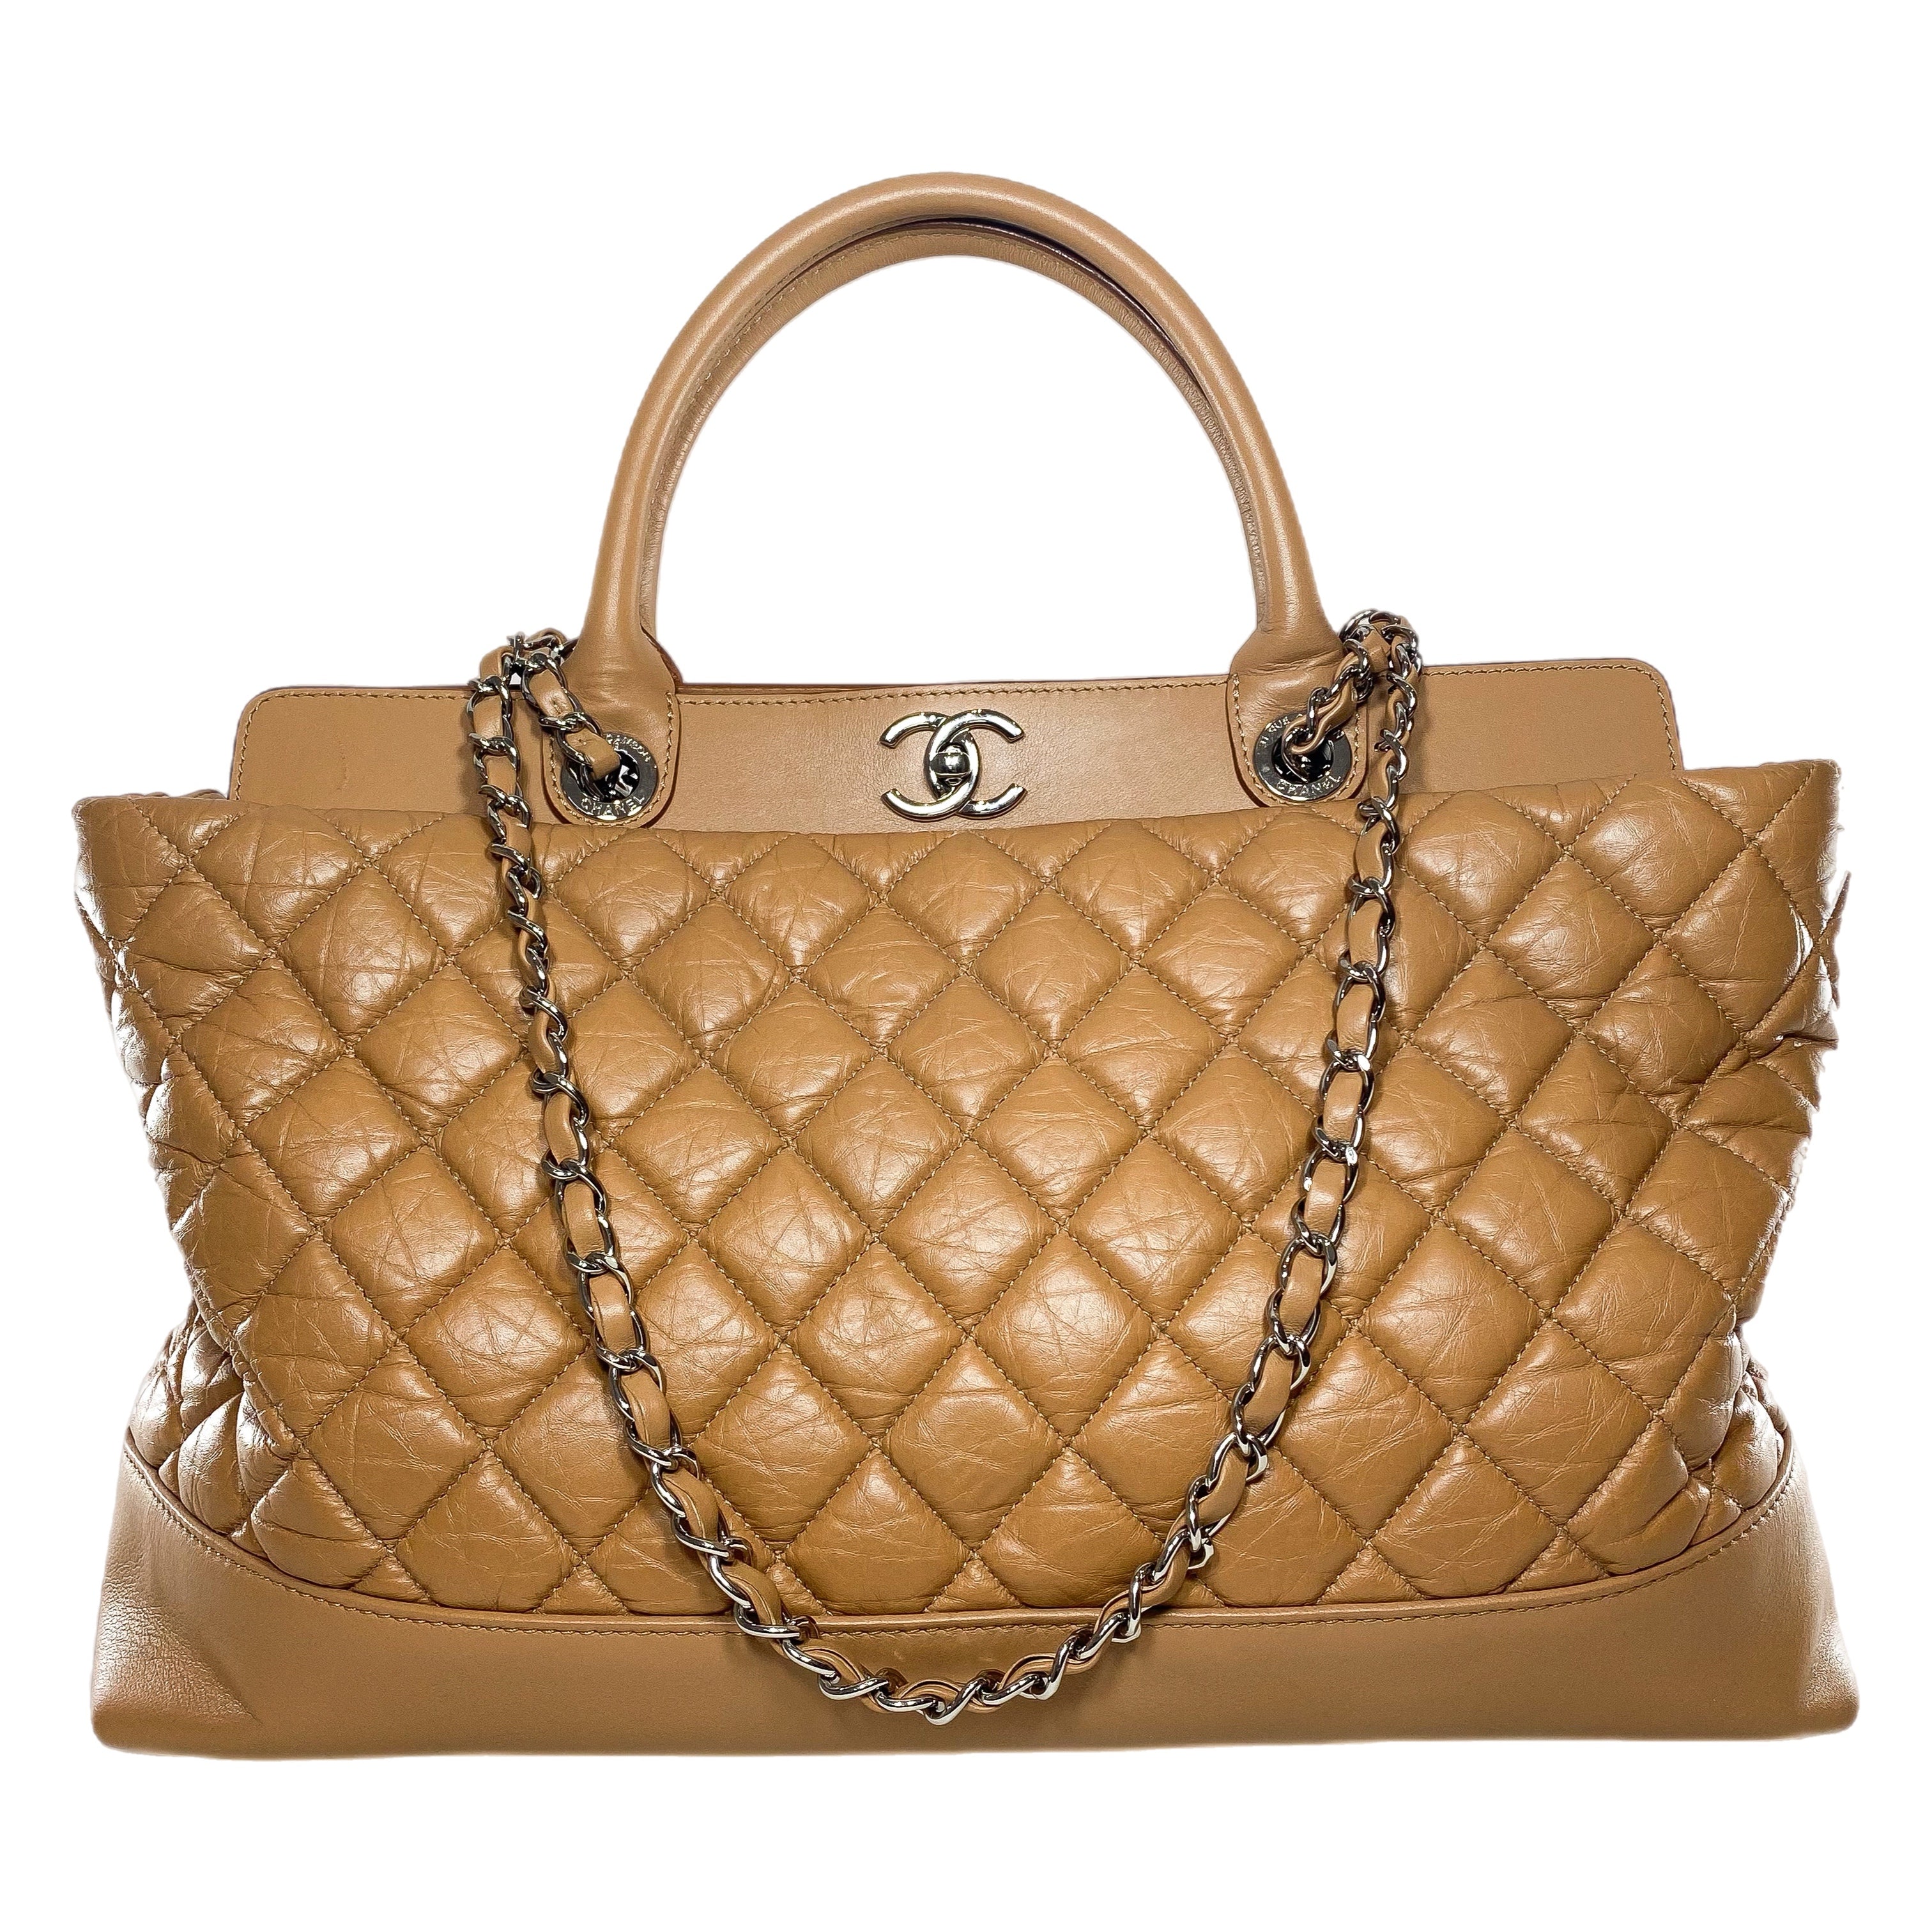 Chanel Beige Quilted Be CC Tote Bag